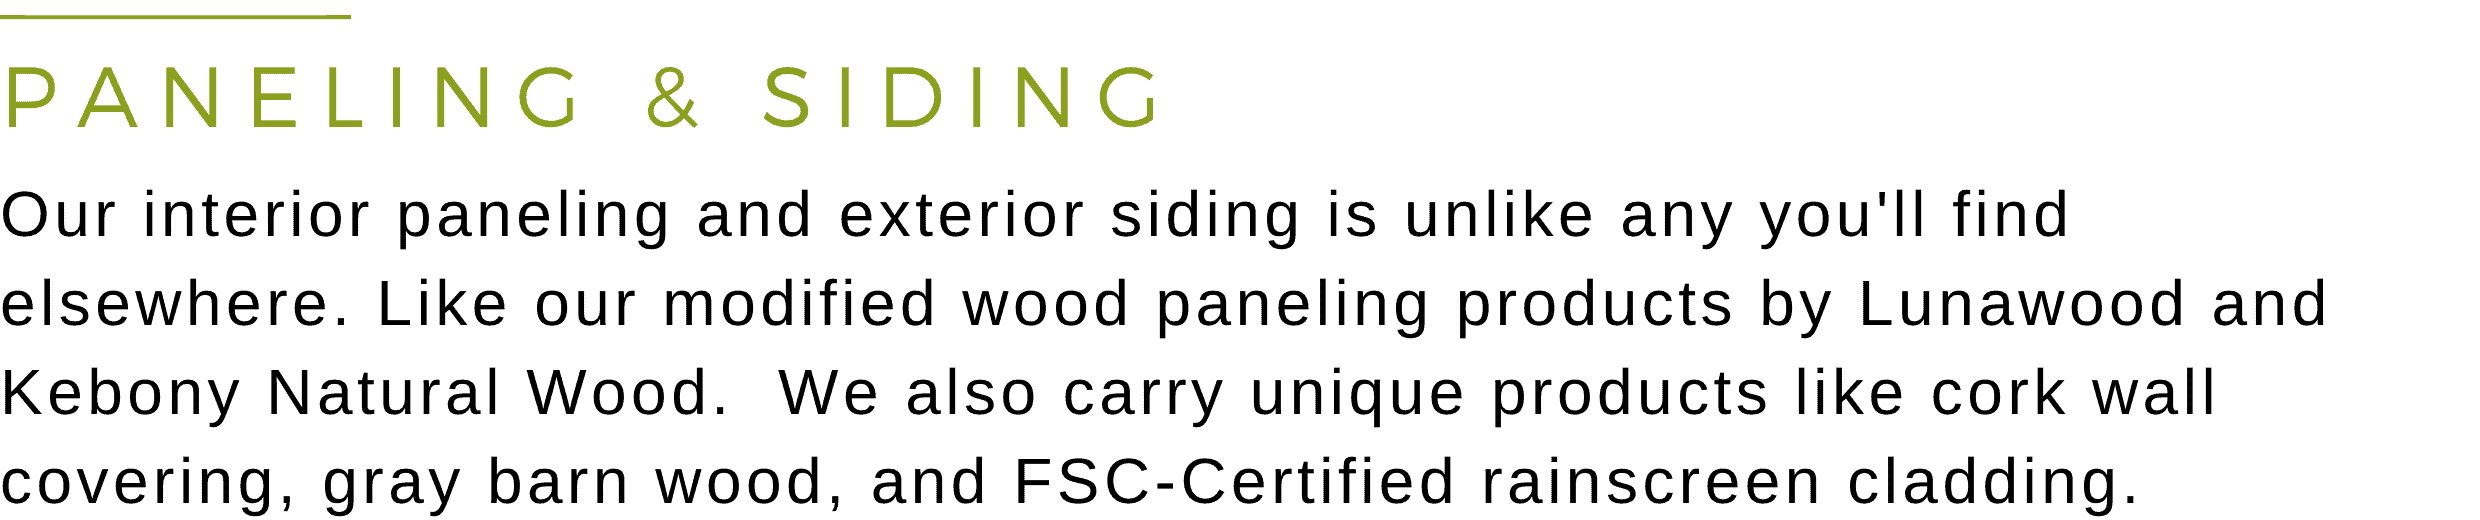 Our interior paneling and exterior siding is unlike any you'll find elsewhere. Like our modified wood paneling products by Lunawood and Kebony Natural Wood.  We also carry unique products like cork wall covering, gray barn wood, and FSC-Certified rainscreen cladding.